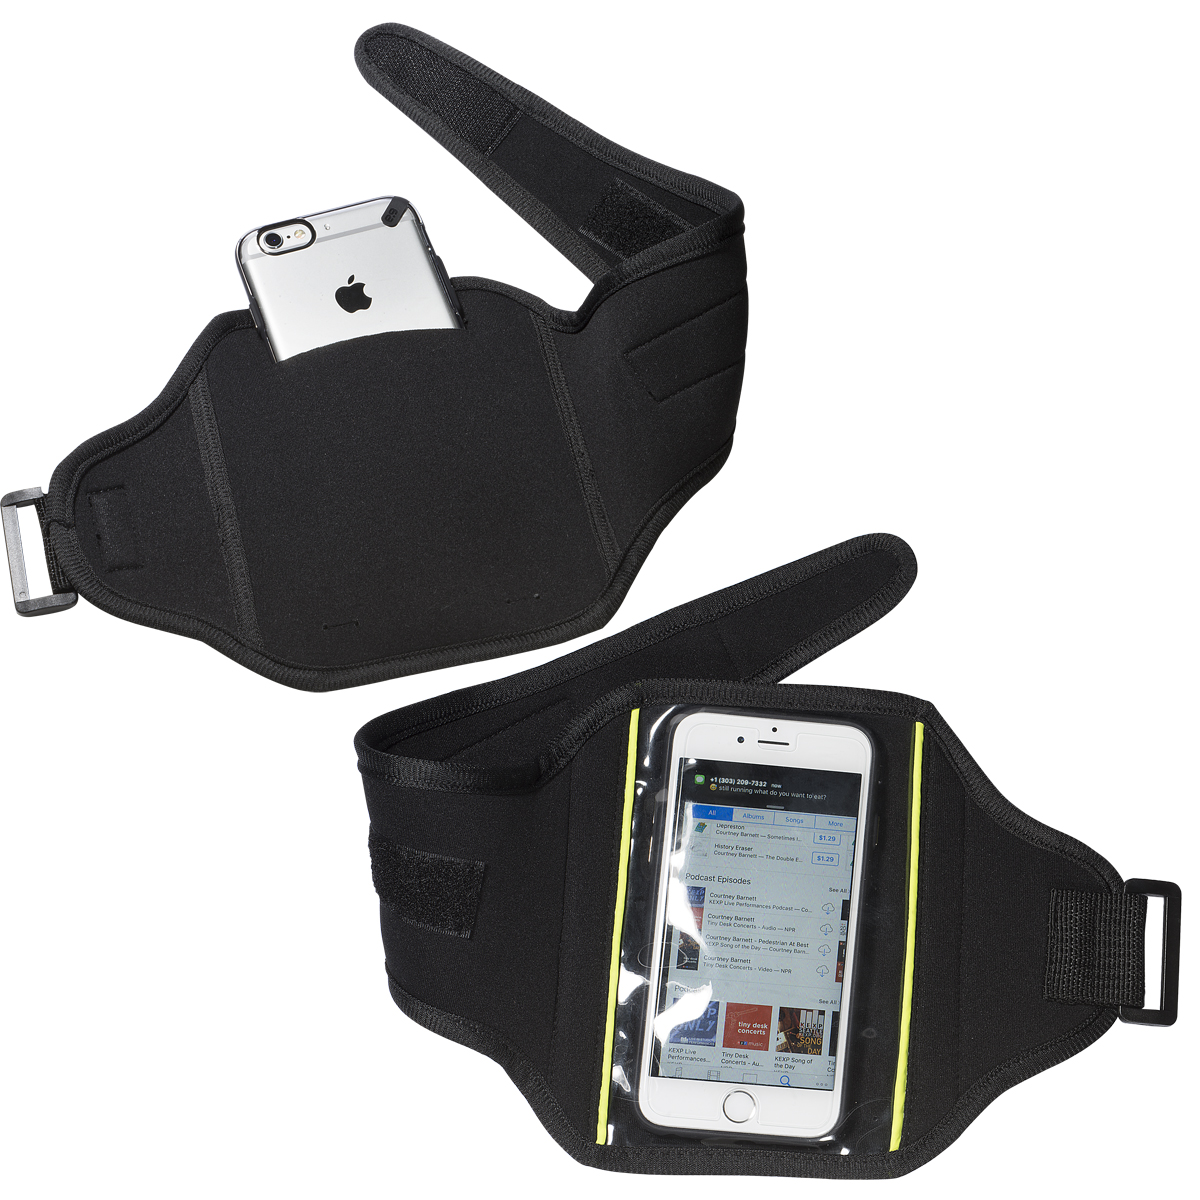 Easy-Fit Sport Armband Phone Holder